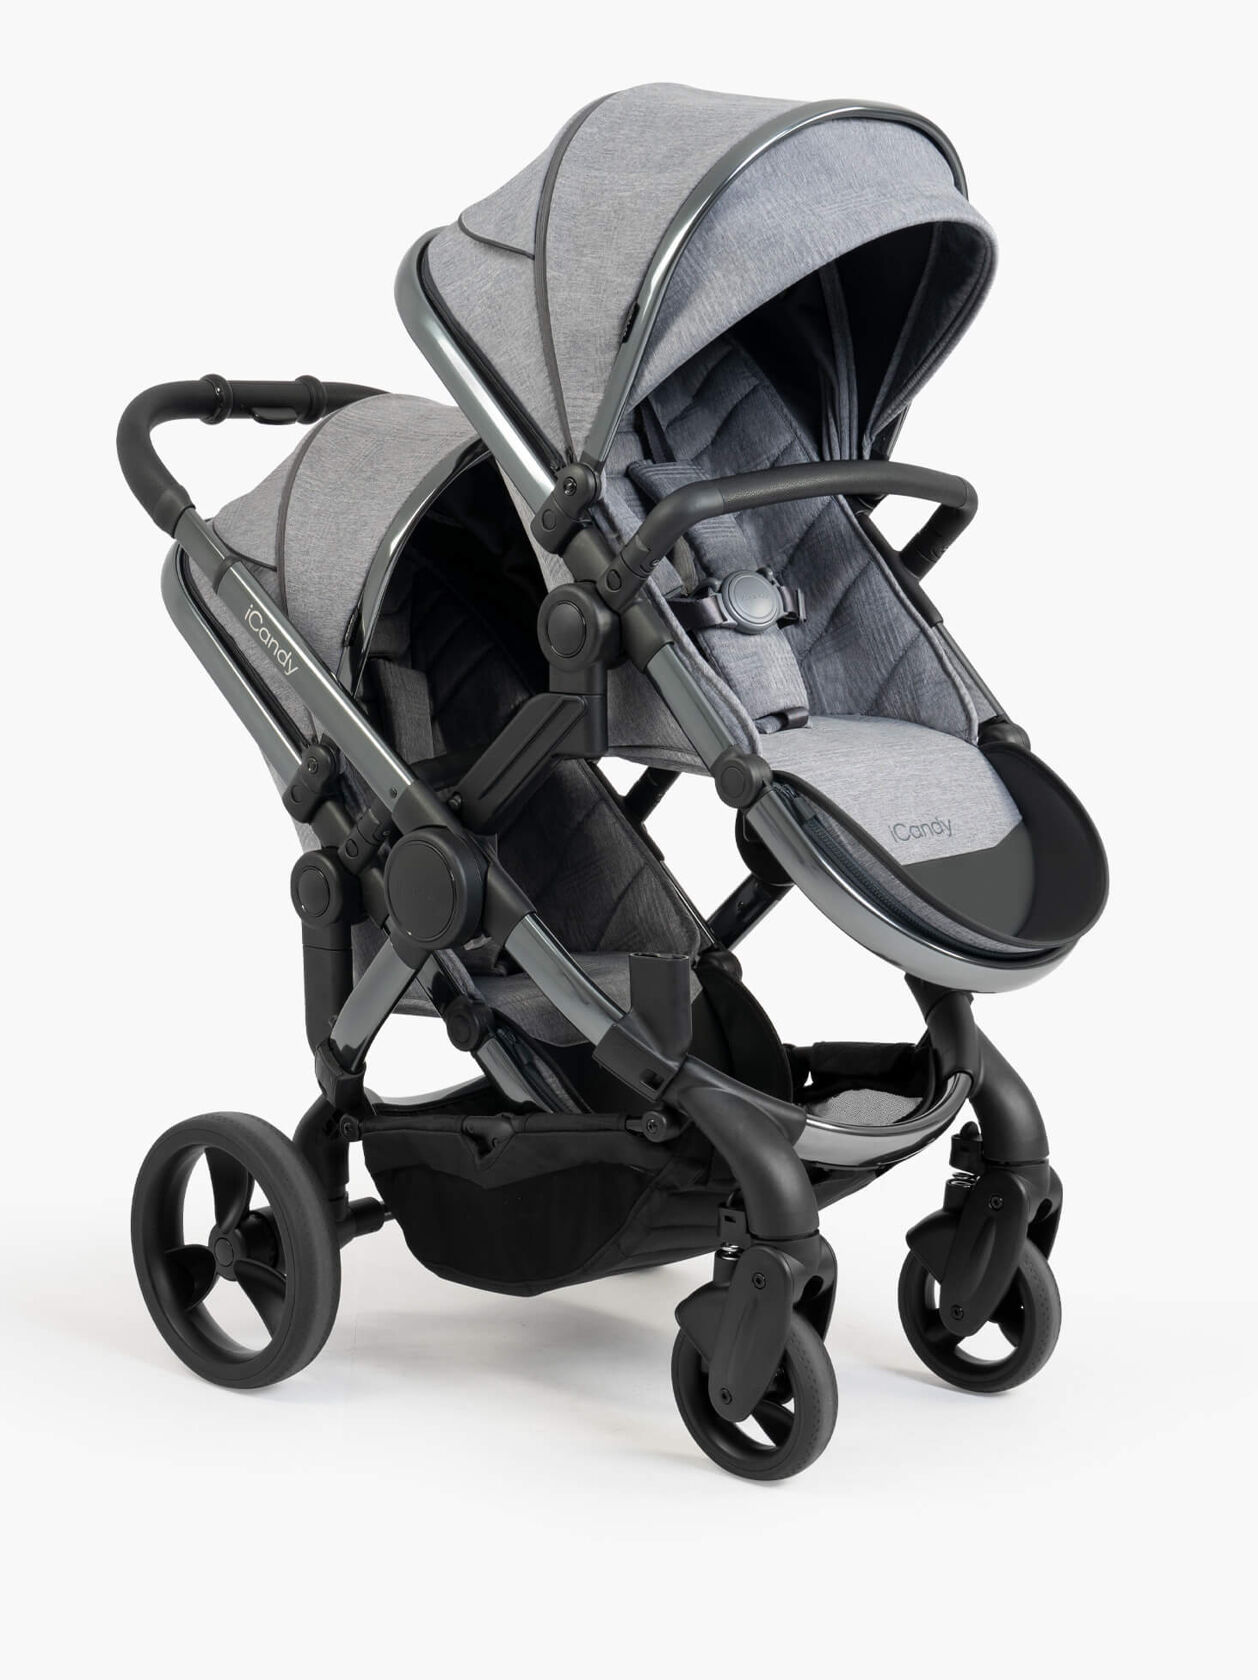 Peach Pushchair and Carrycot - Twin